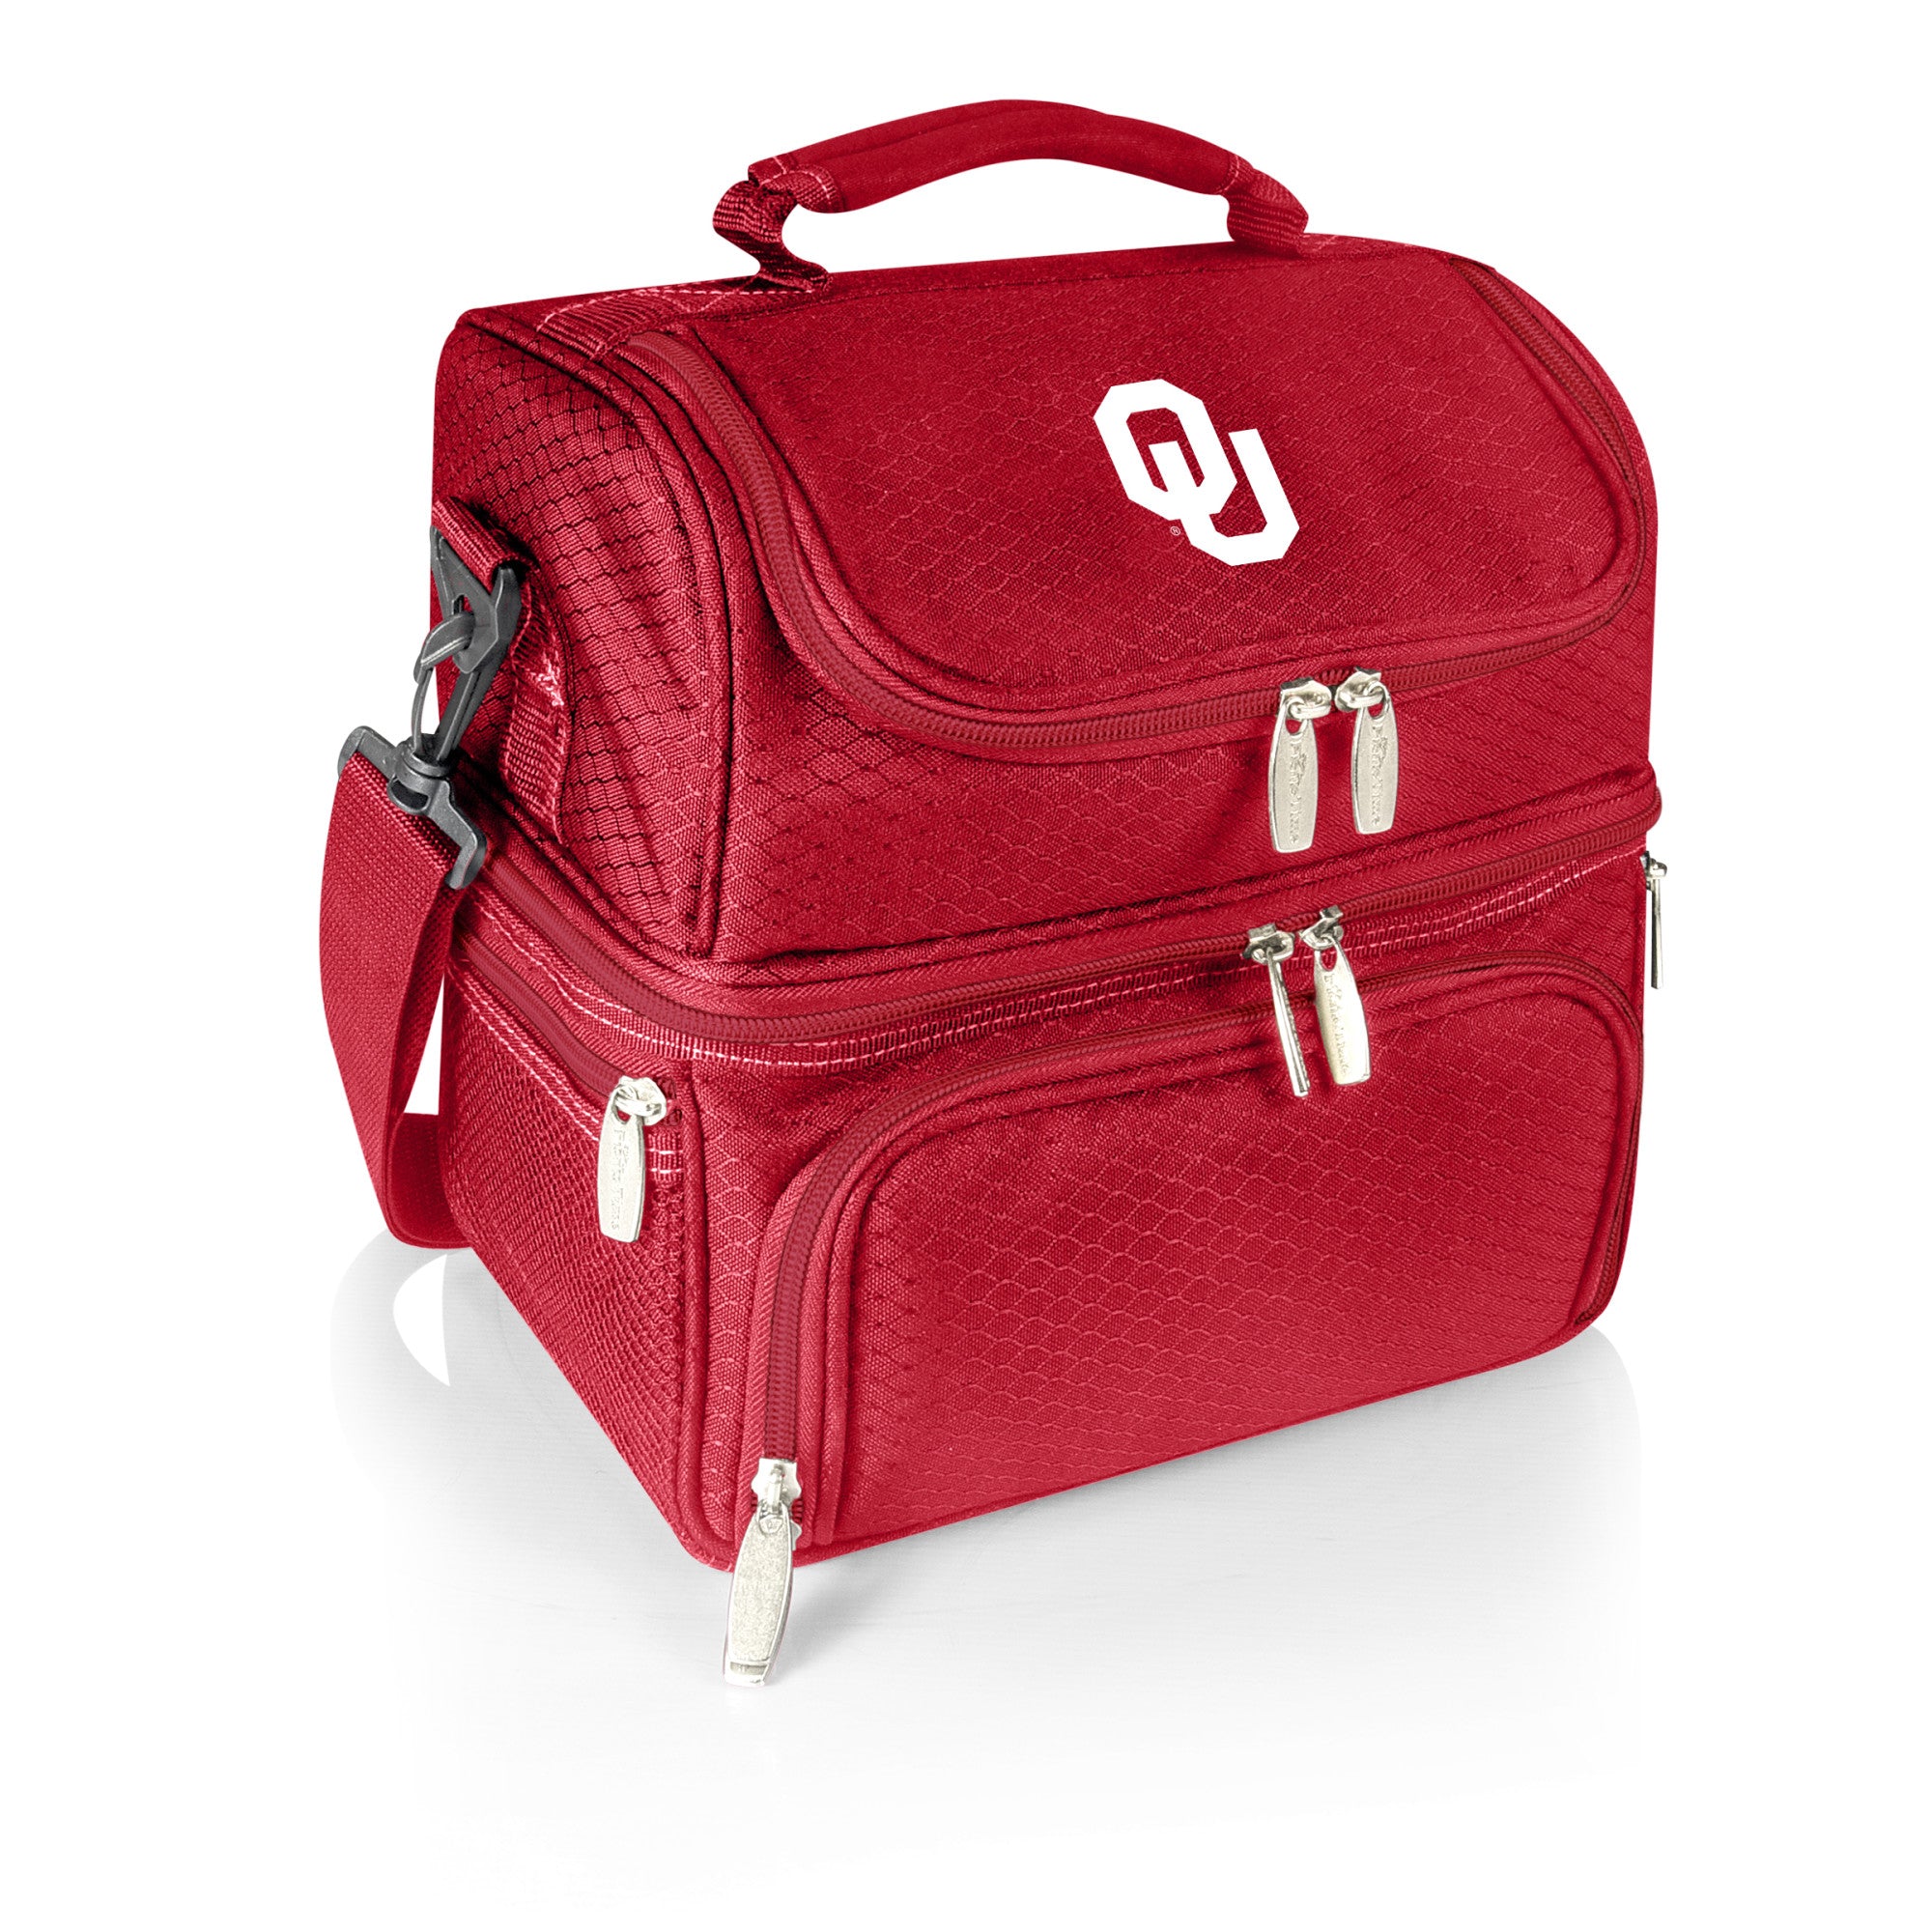 Oklahoma Sooners - Pranzo Lunch Bag Cooler with Utensils